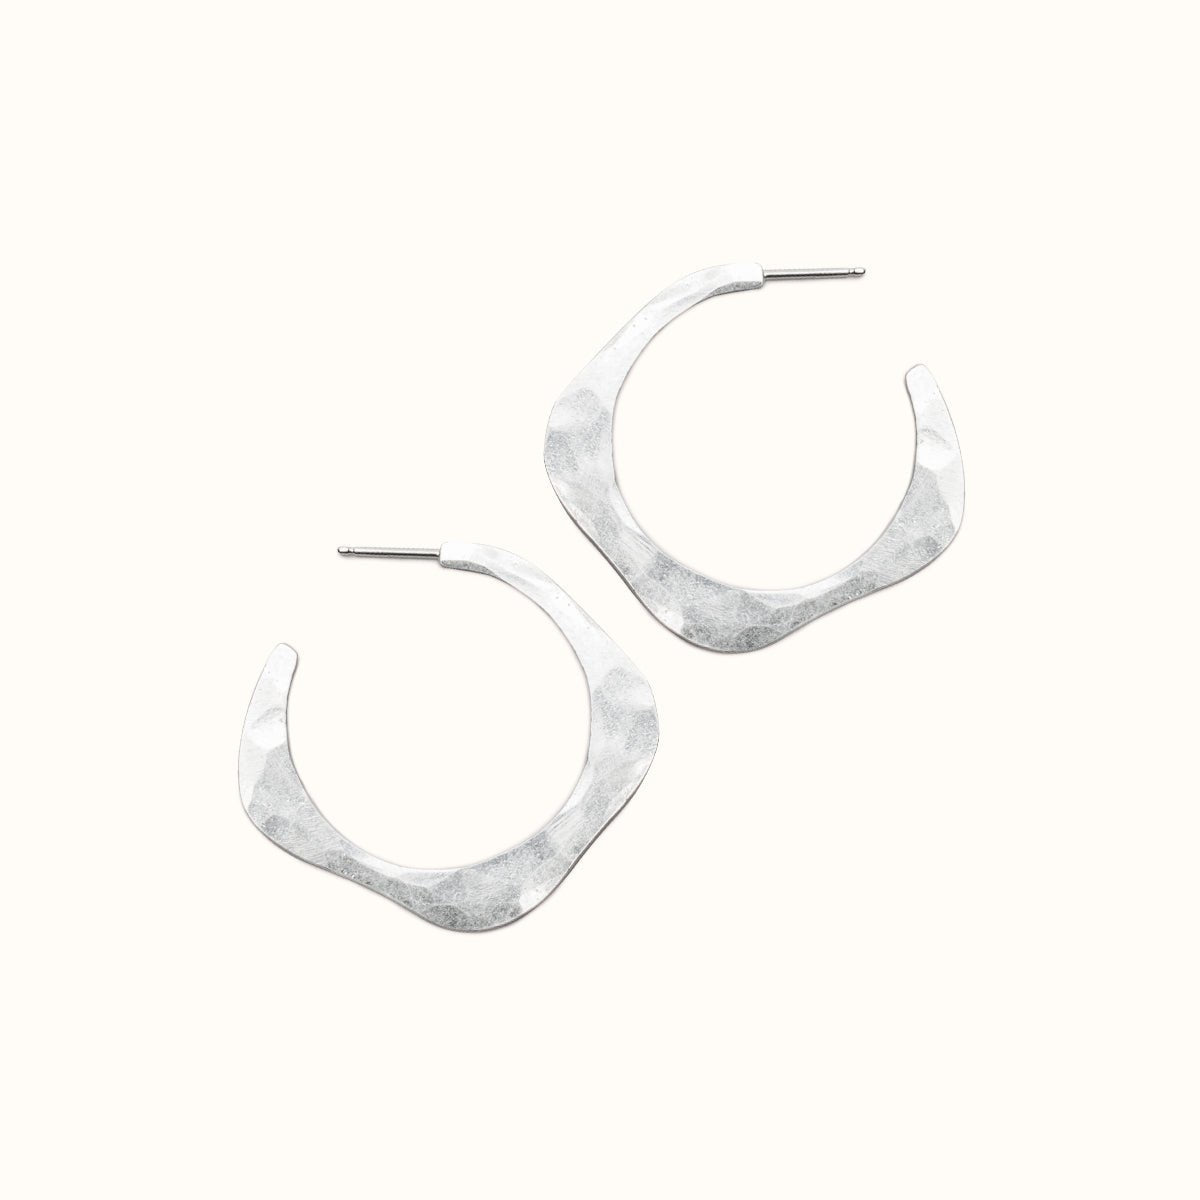 A sterling silver hoop earring in a wave design with a hand hammered texture and sterling silver earring posts. The small Doble Hoop Earrings are designed and handcrafted in Portland, Oregon.